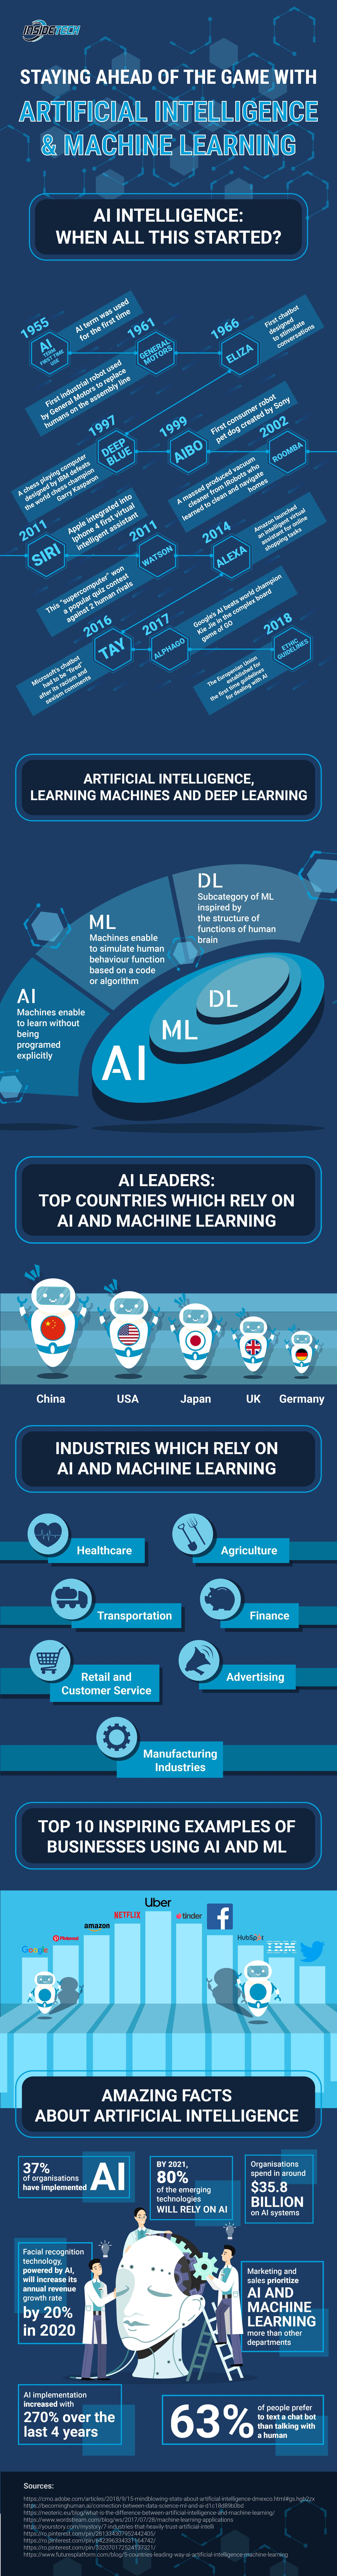 Top 3 Artificial Intelligence Technologies By Experts